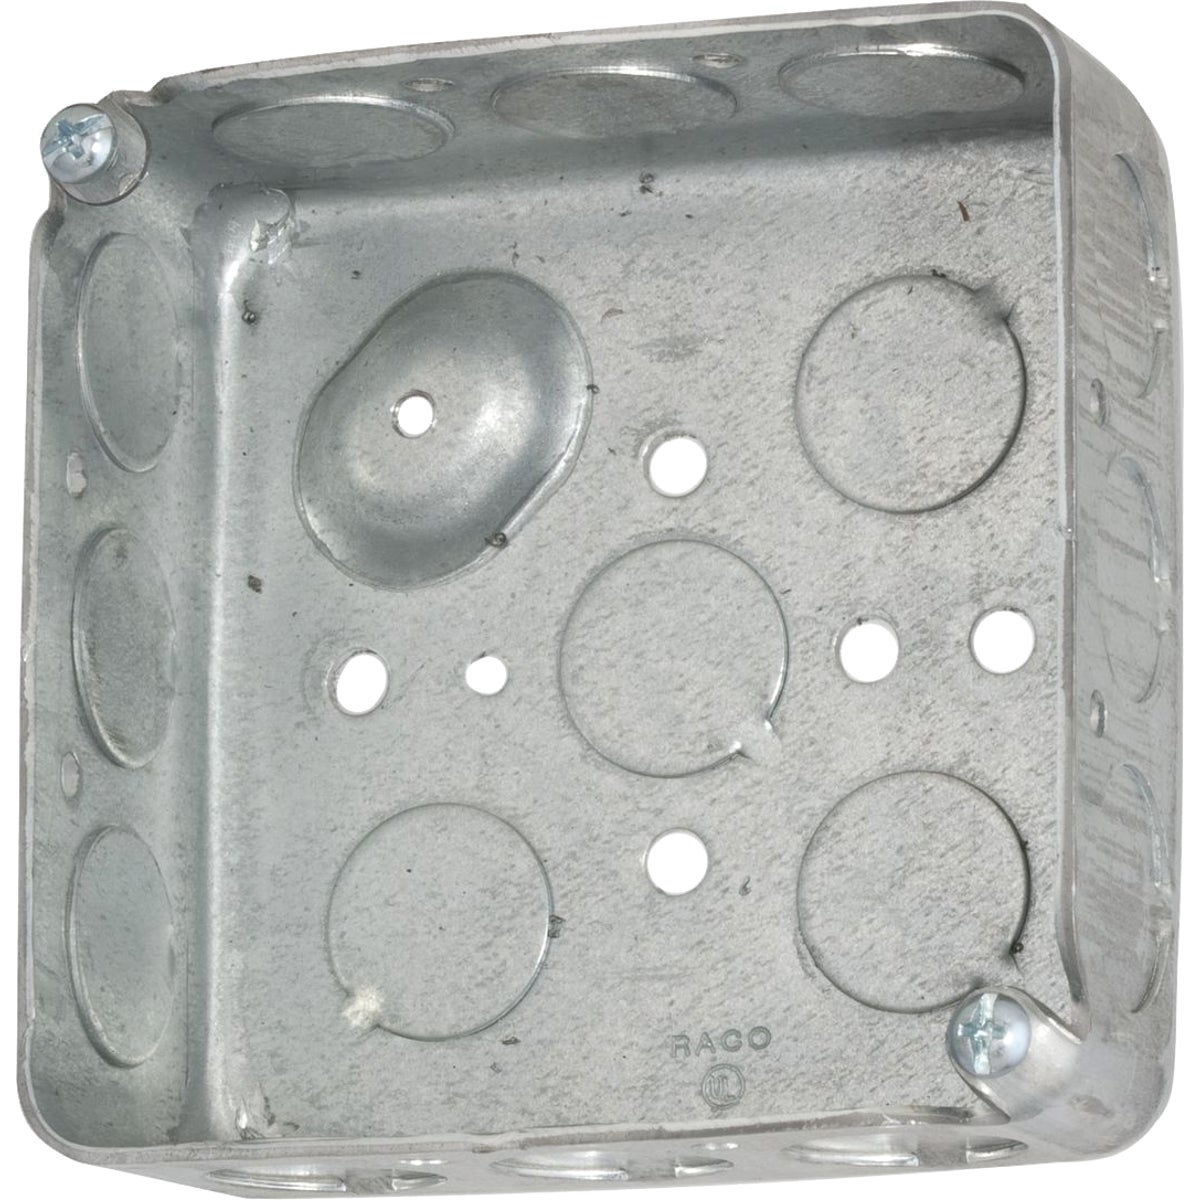 Item 507963, Square electrical box used to distribute power to a number of electrical 